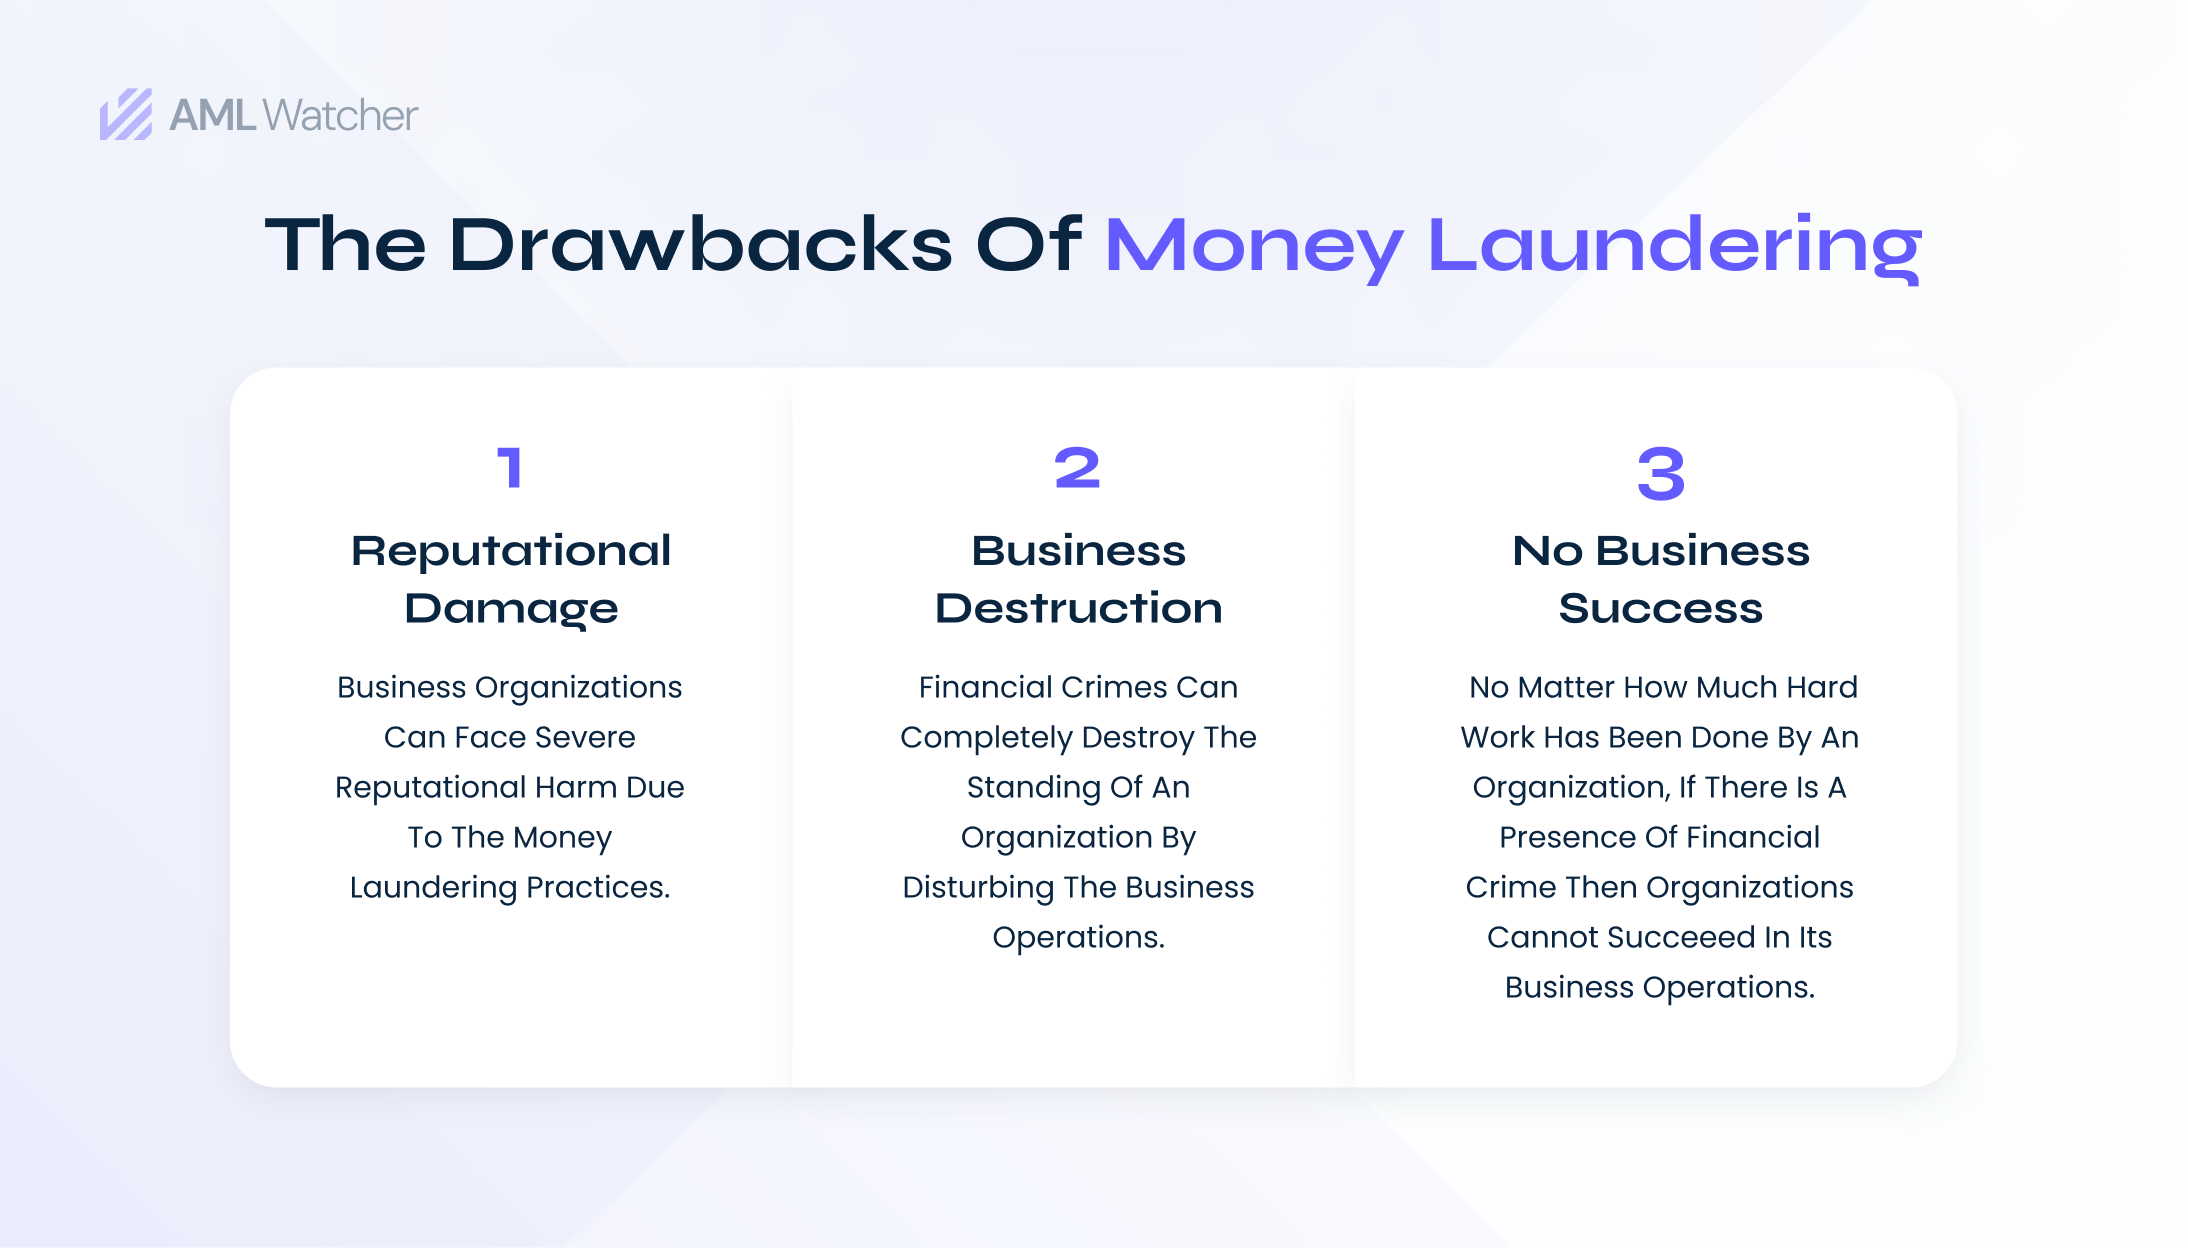 Organizations are facing severe challenges in the business environment due to money laundering.